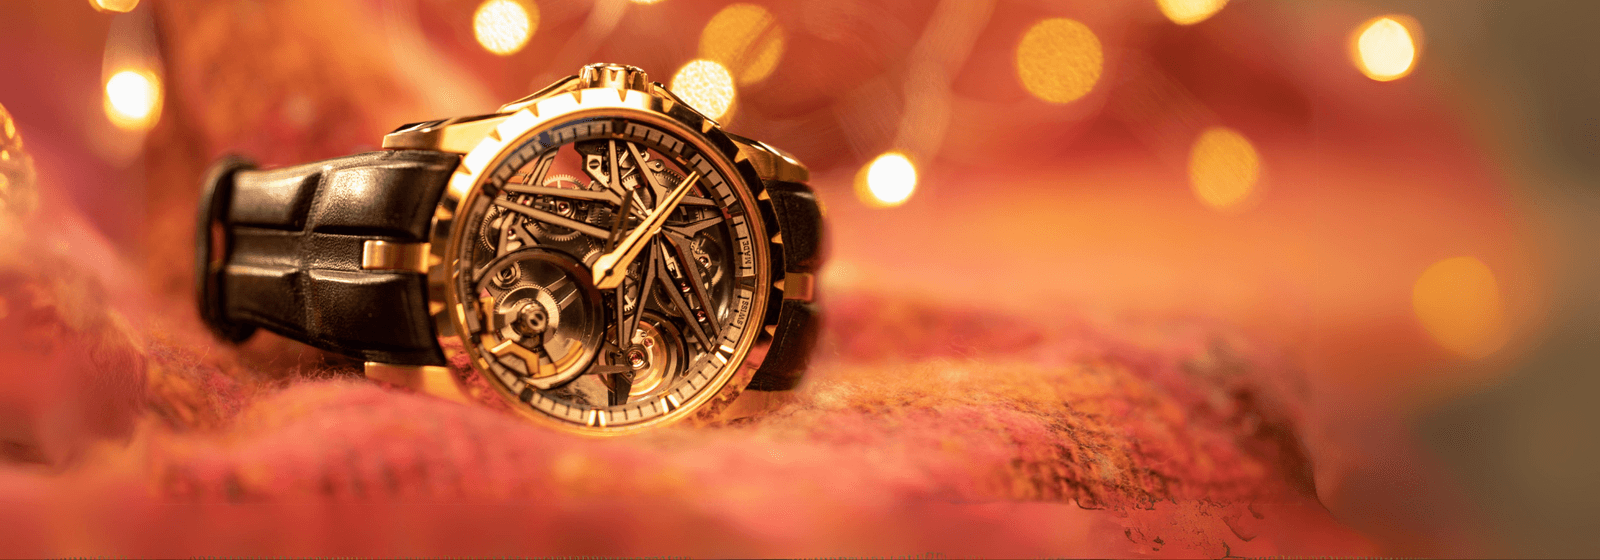 Roger Dubuis' Golden Ticket To The Festive Season